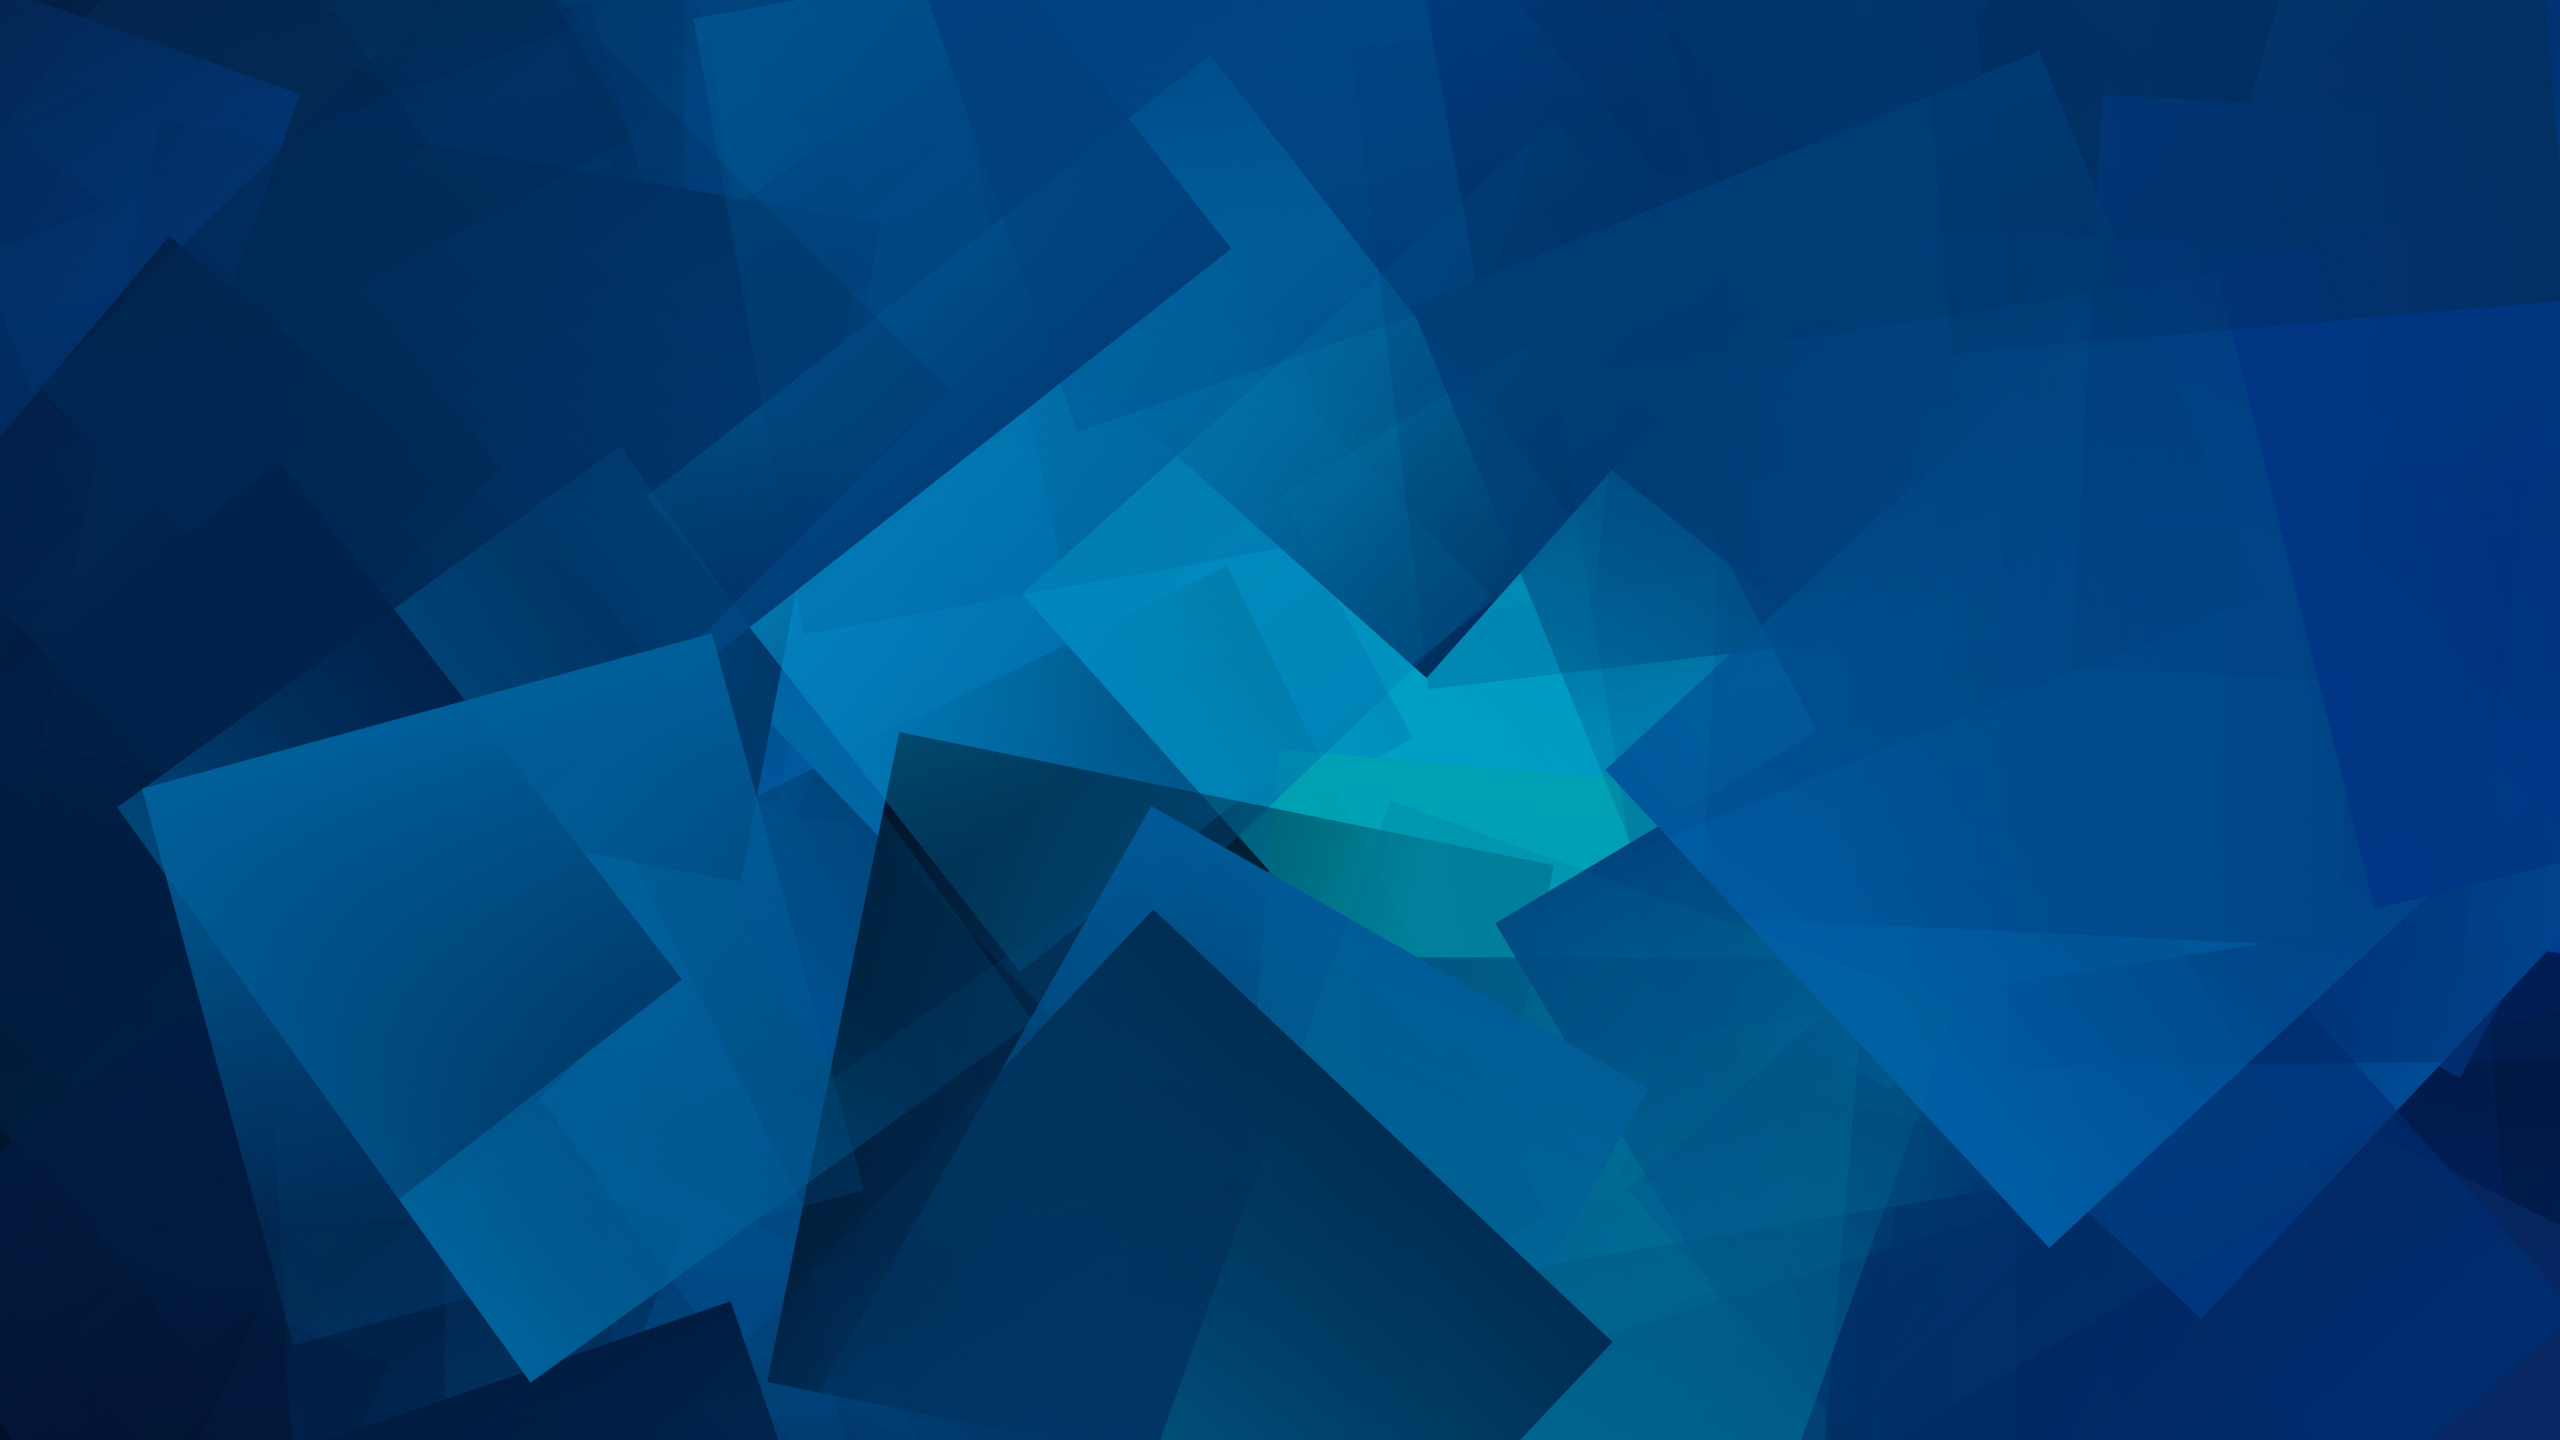 Blue and Teal Abstract Art. Wallpaper in 2560x1440 Resolution